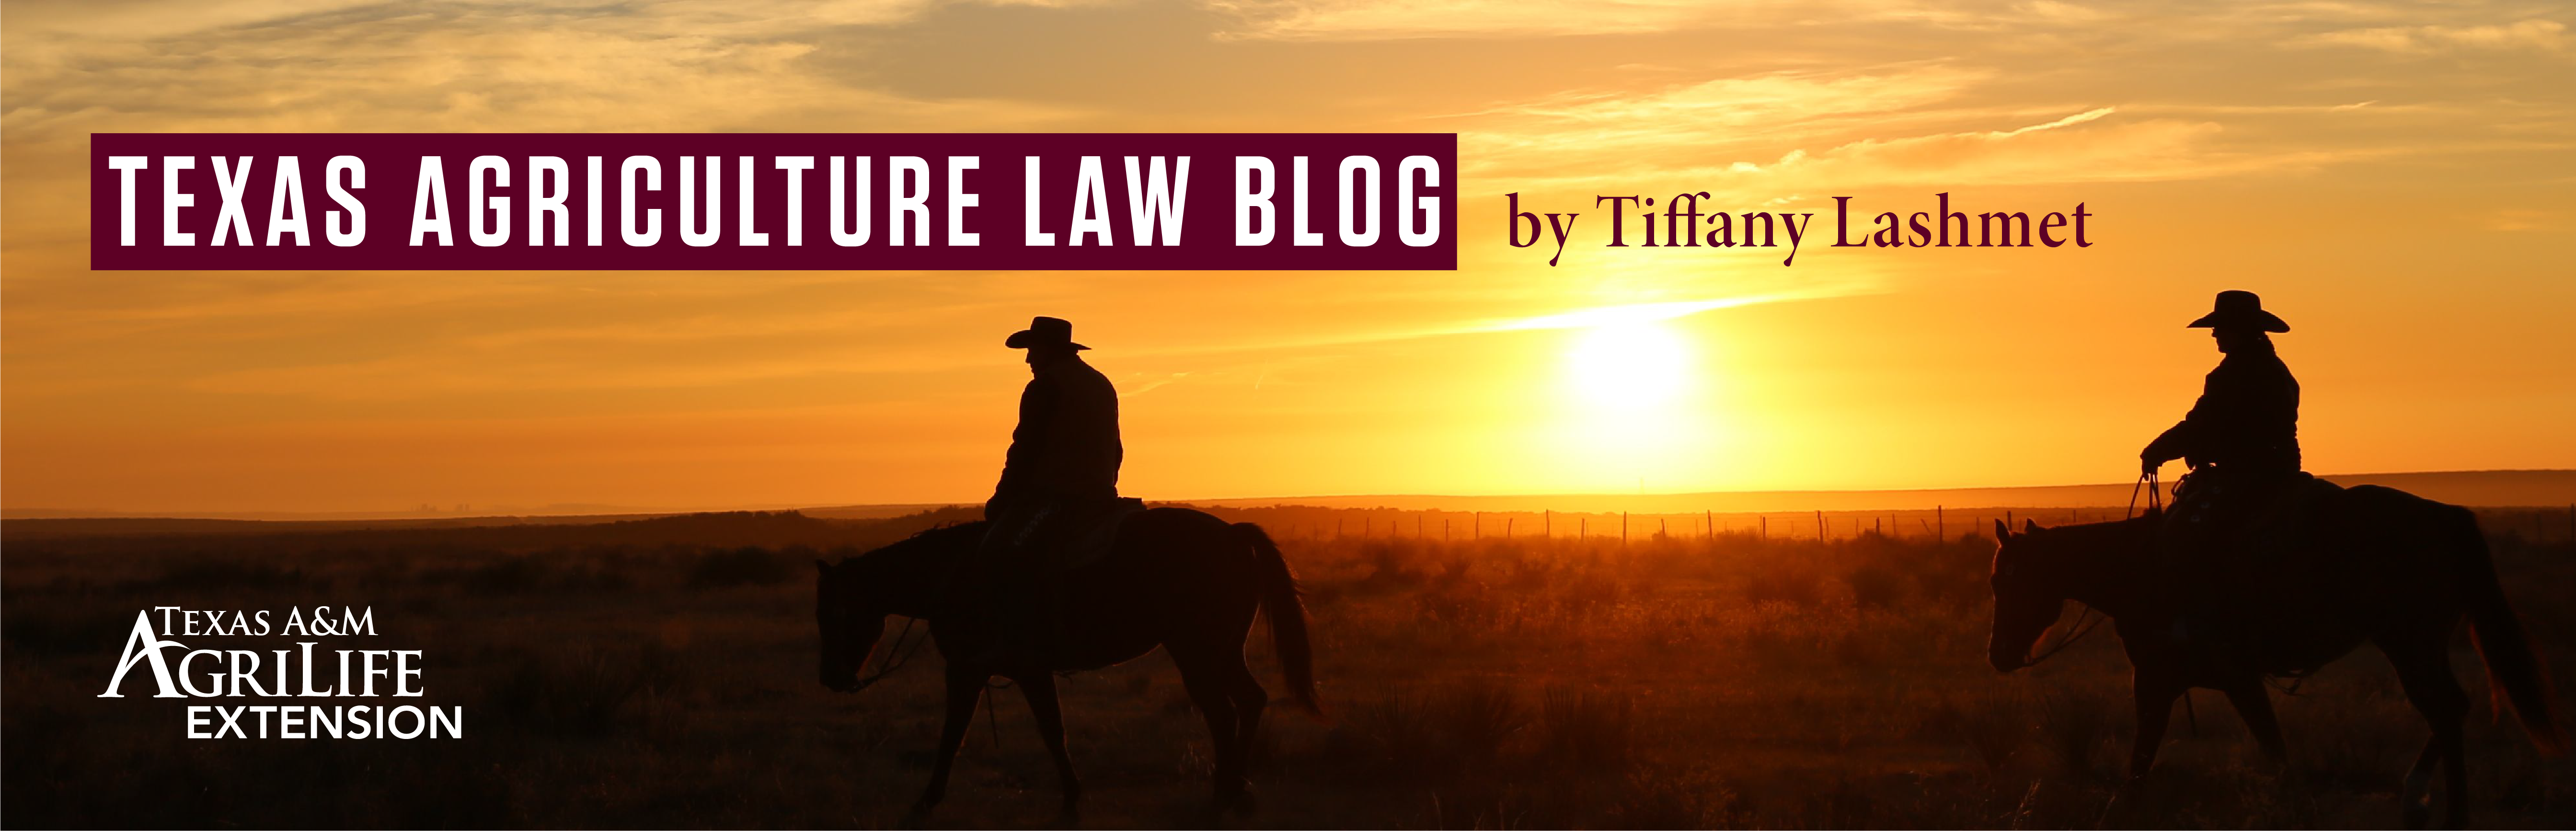 Texas Agriculure Law Blog